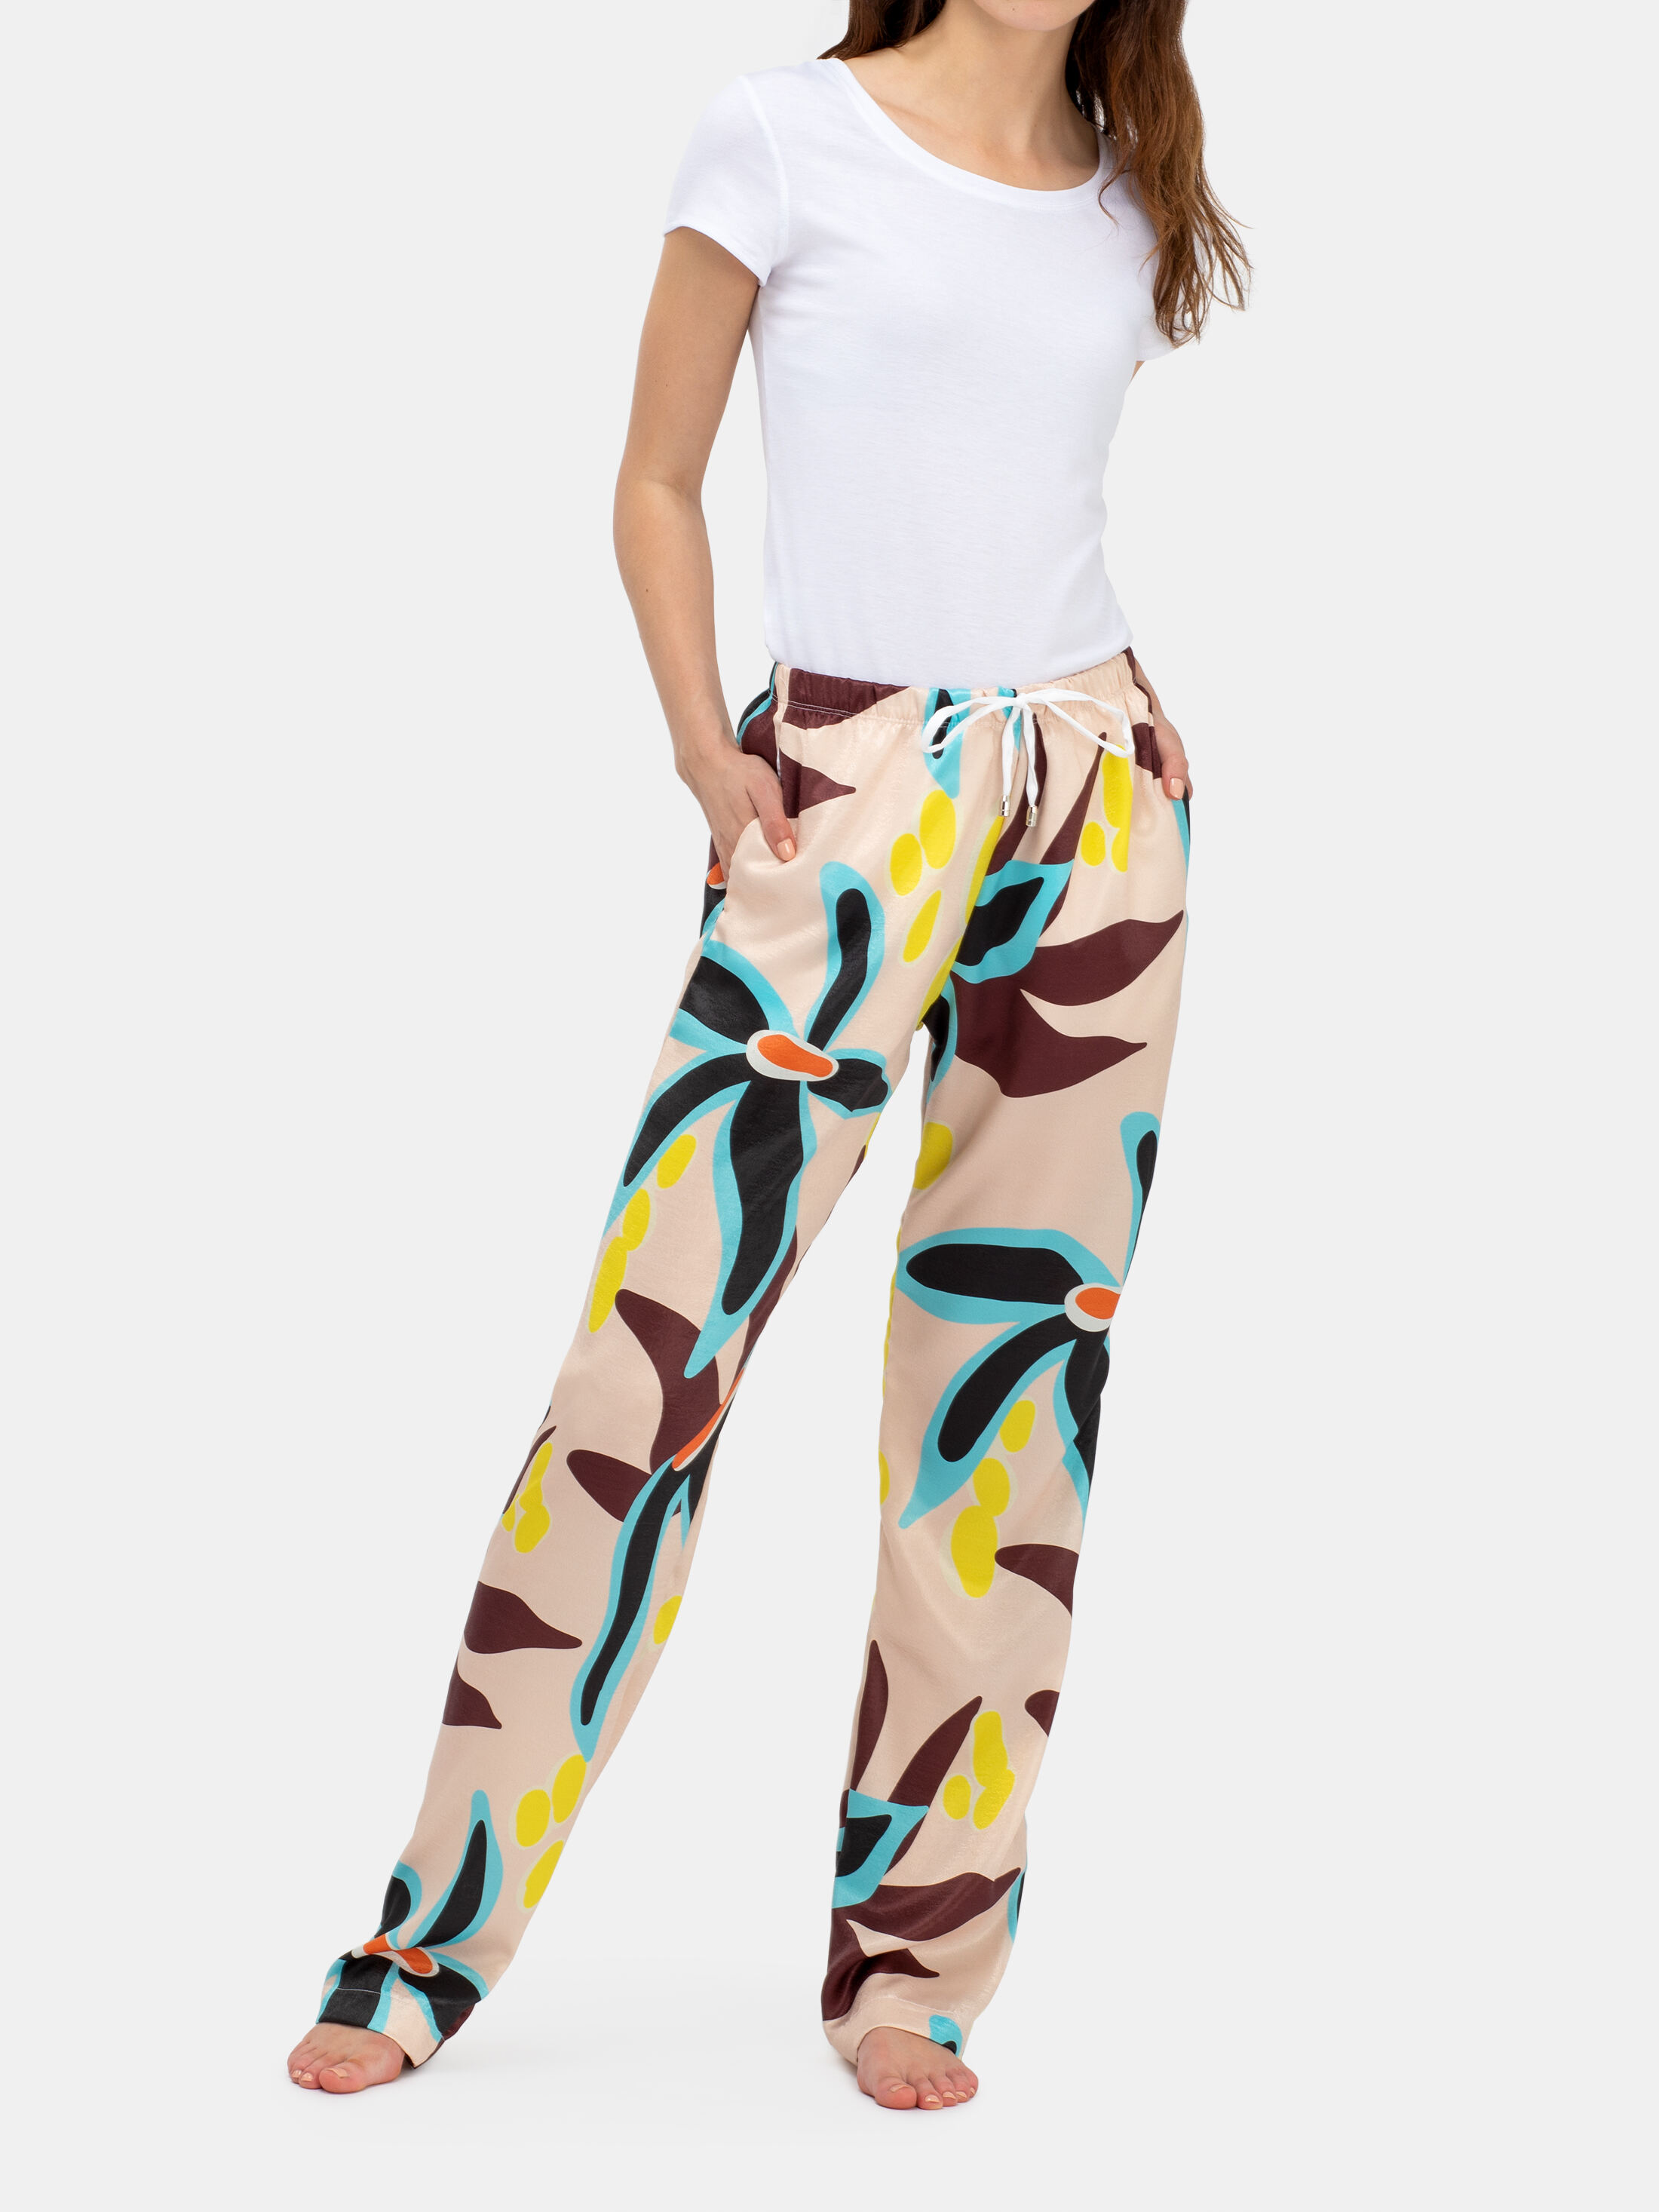 Trousers for Women  Buy Ladies Trousers at Rs899  Bewakoofcom